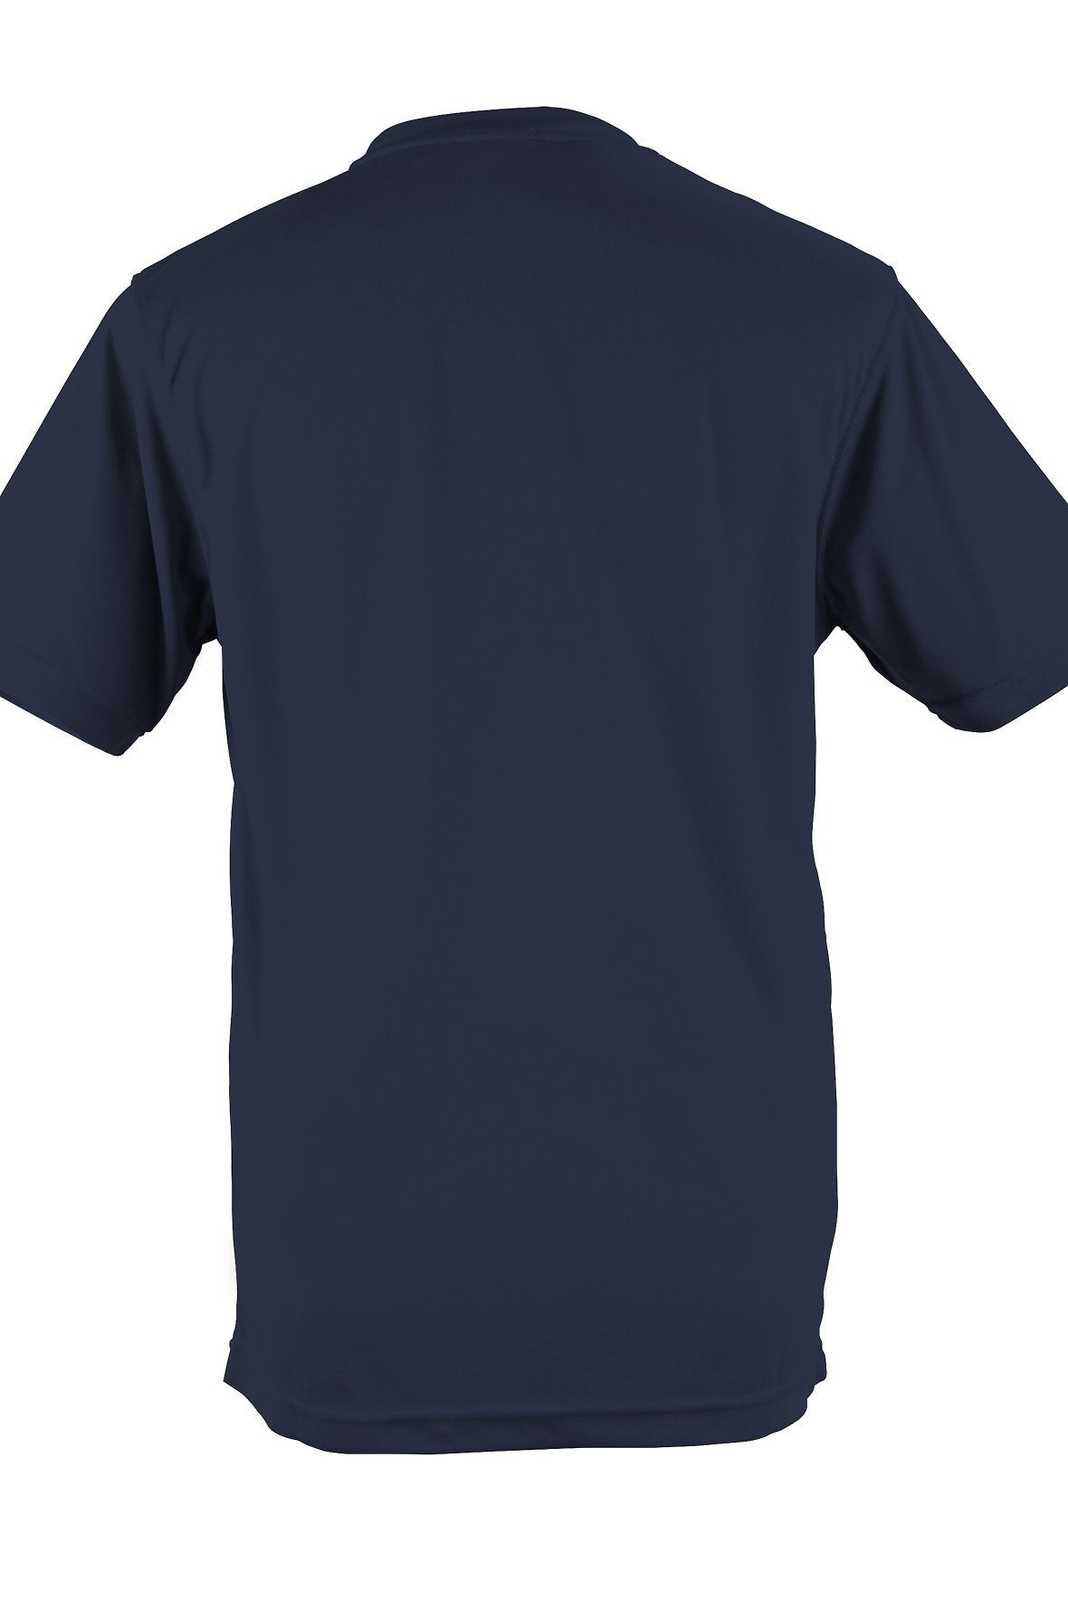 Just Cool JCA001 Cool Tee - Oxford Navy - HIT a Double